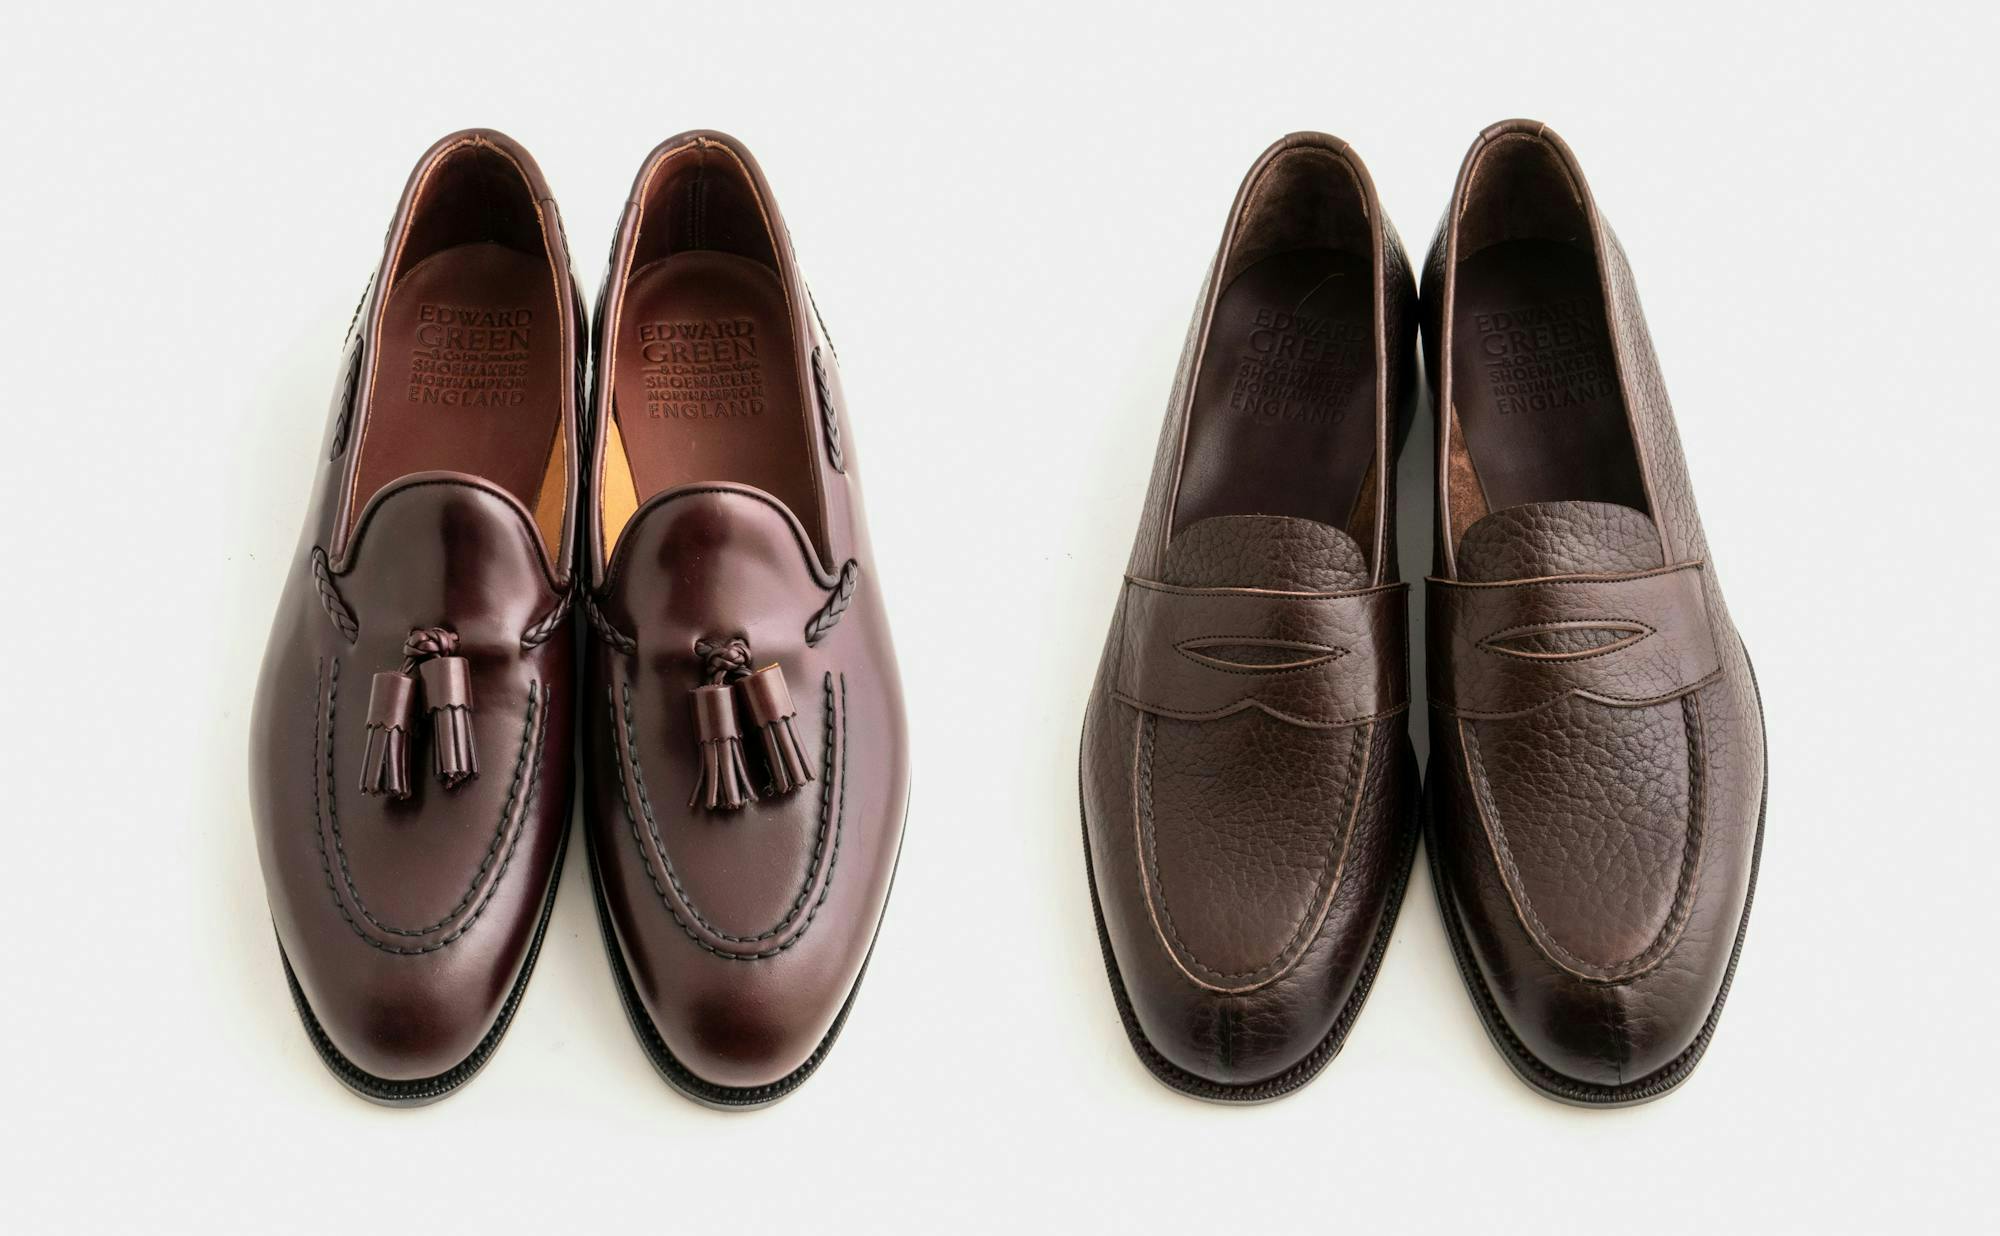 A pair of burgundy Belgravia loafers and a pair of brown Harrow loafers.